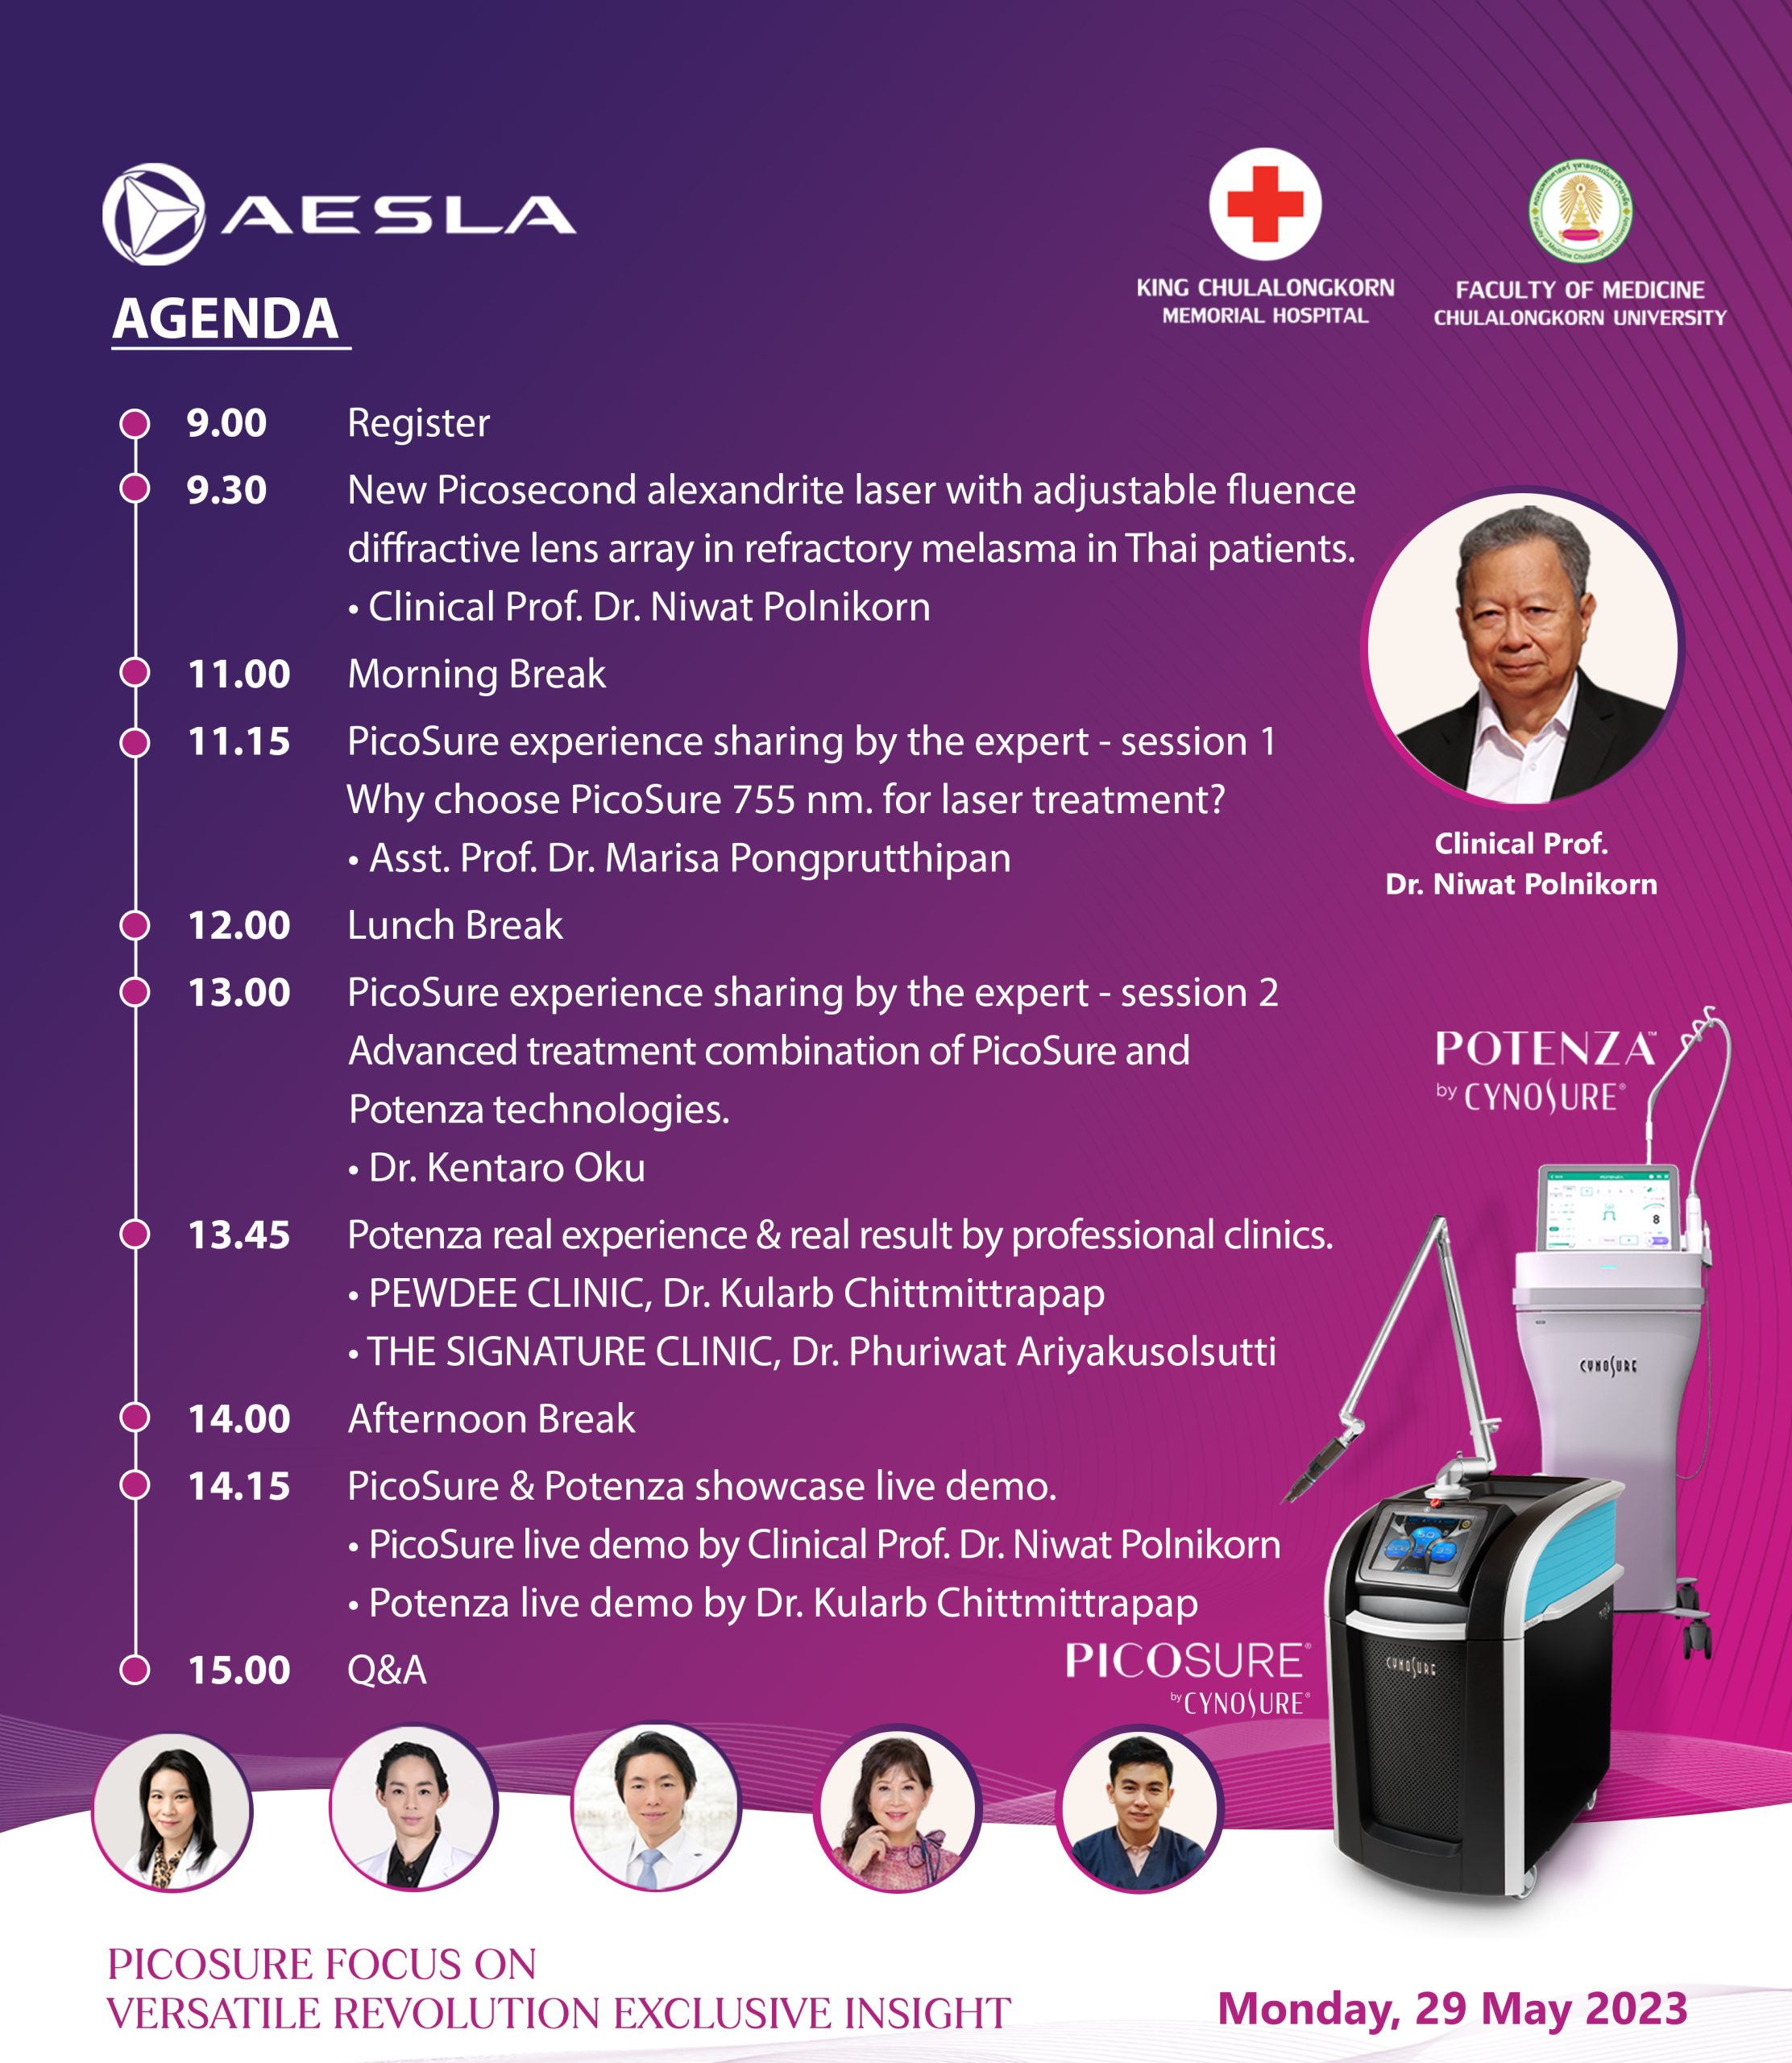 PICOSURE FOCUS ON VERSATILE REVOLUTION EXCLUSIVE INSIGHT Performance & Integrated of Picosecond Laser 755NM.